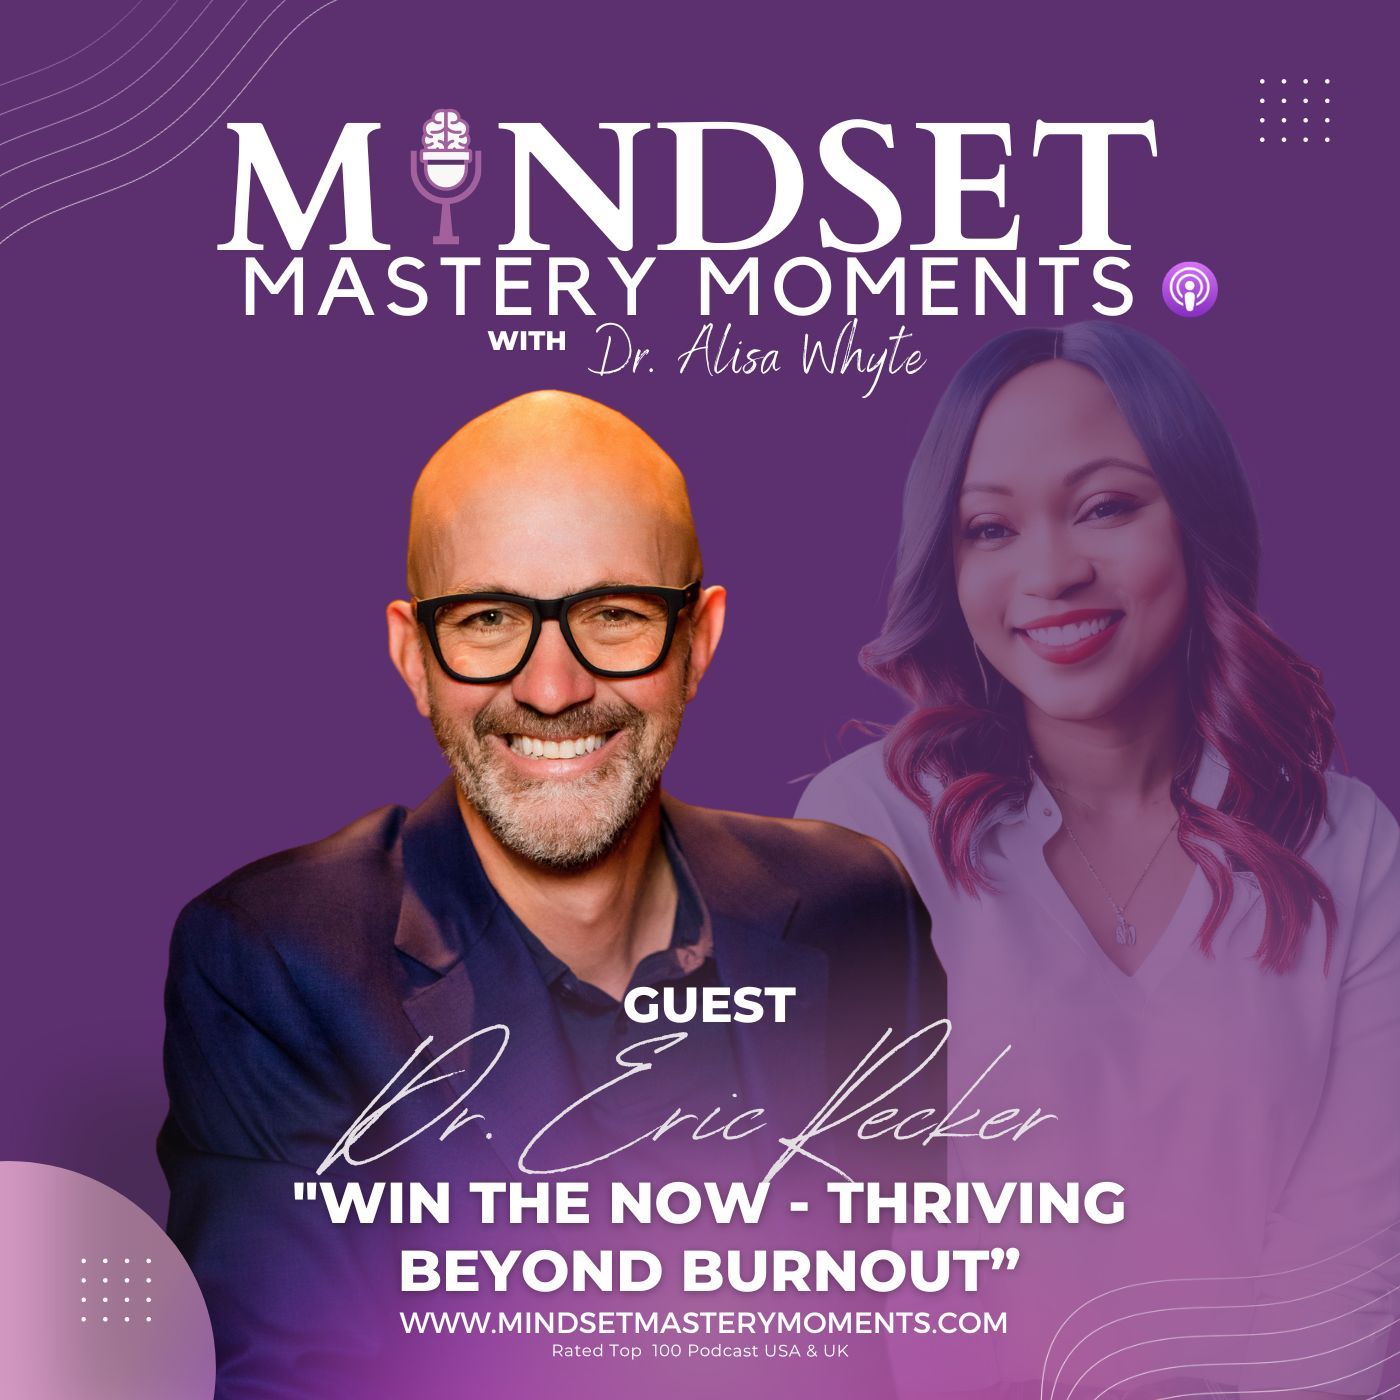 WIN THE NOW – Thriving Beyond Burnout with Dr. Eric Recker (Part 2)